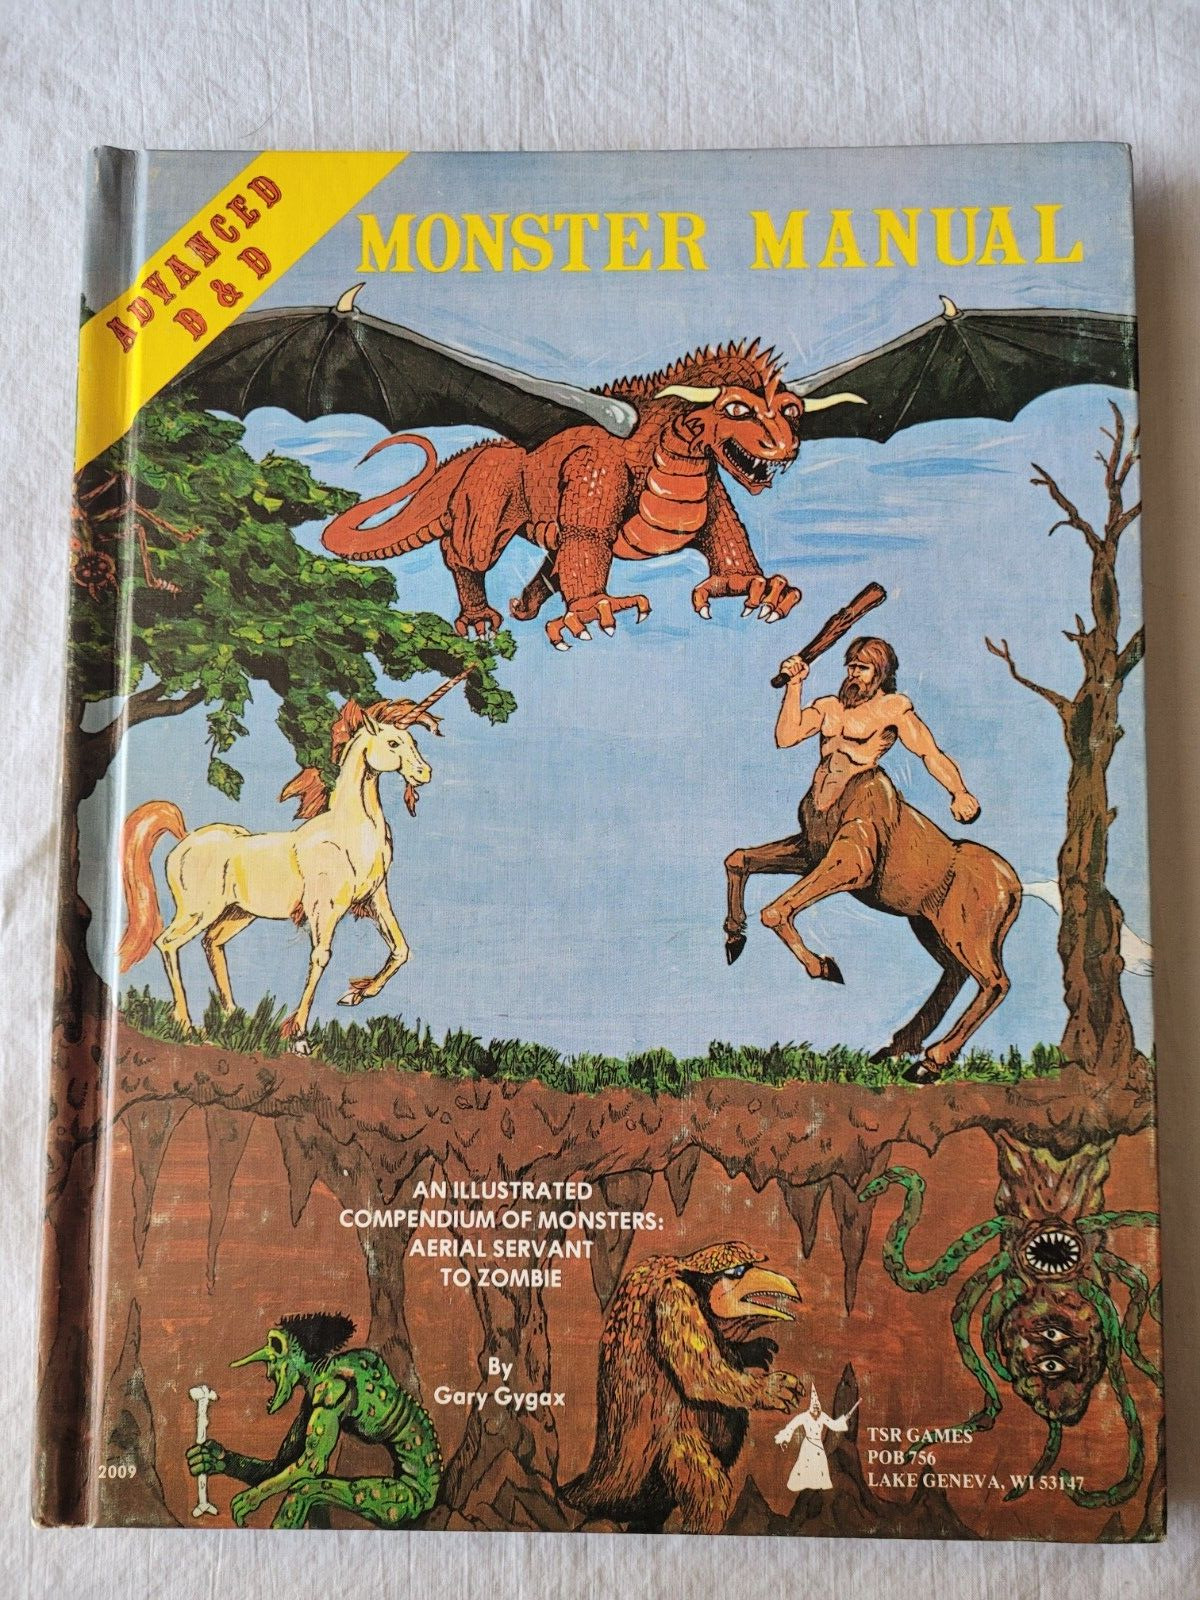 Advanced Dungeons & Dragons - Monster Manual 4th Edition 2009 - Tsr 1979